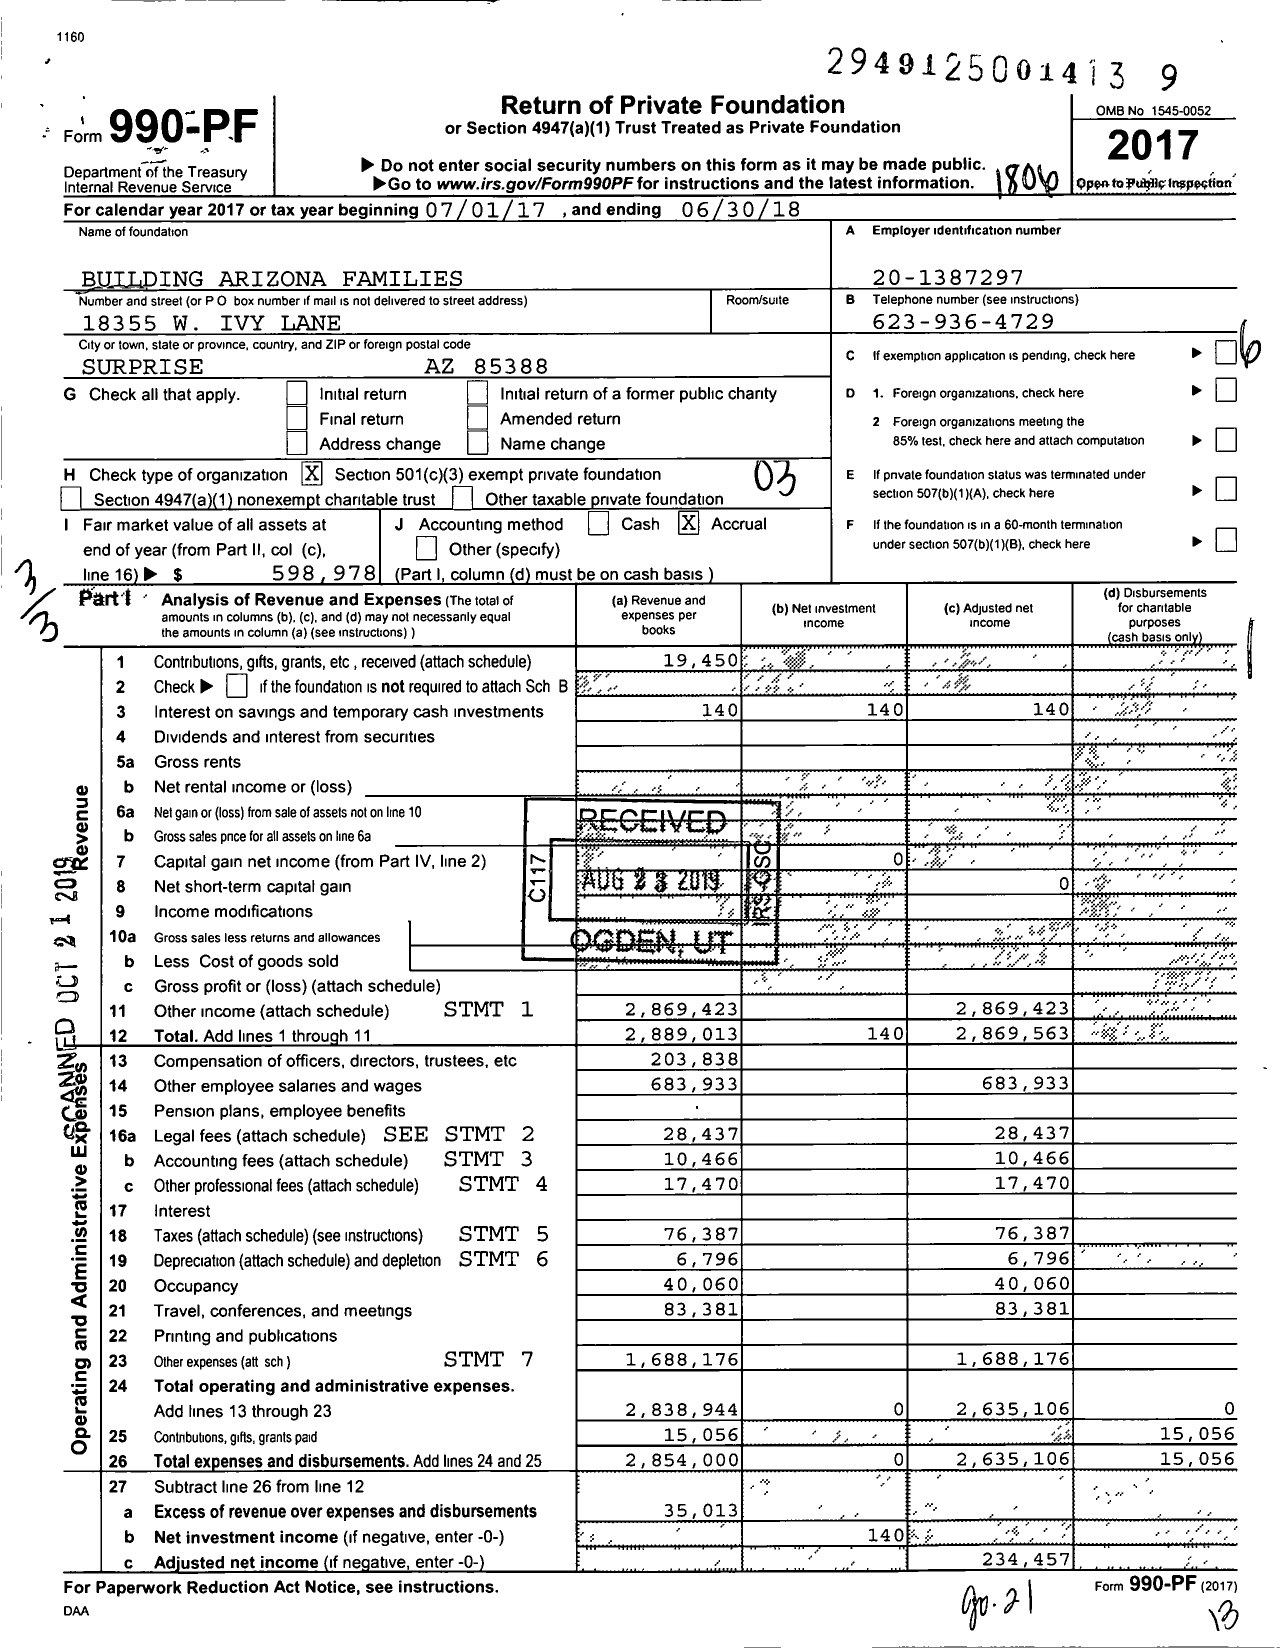 Image of first page of 2017 Form 990PF for Building Arizona Families